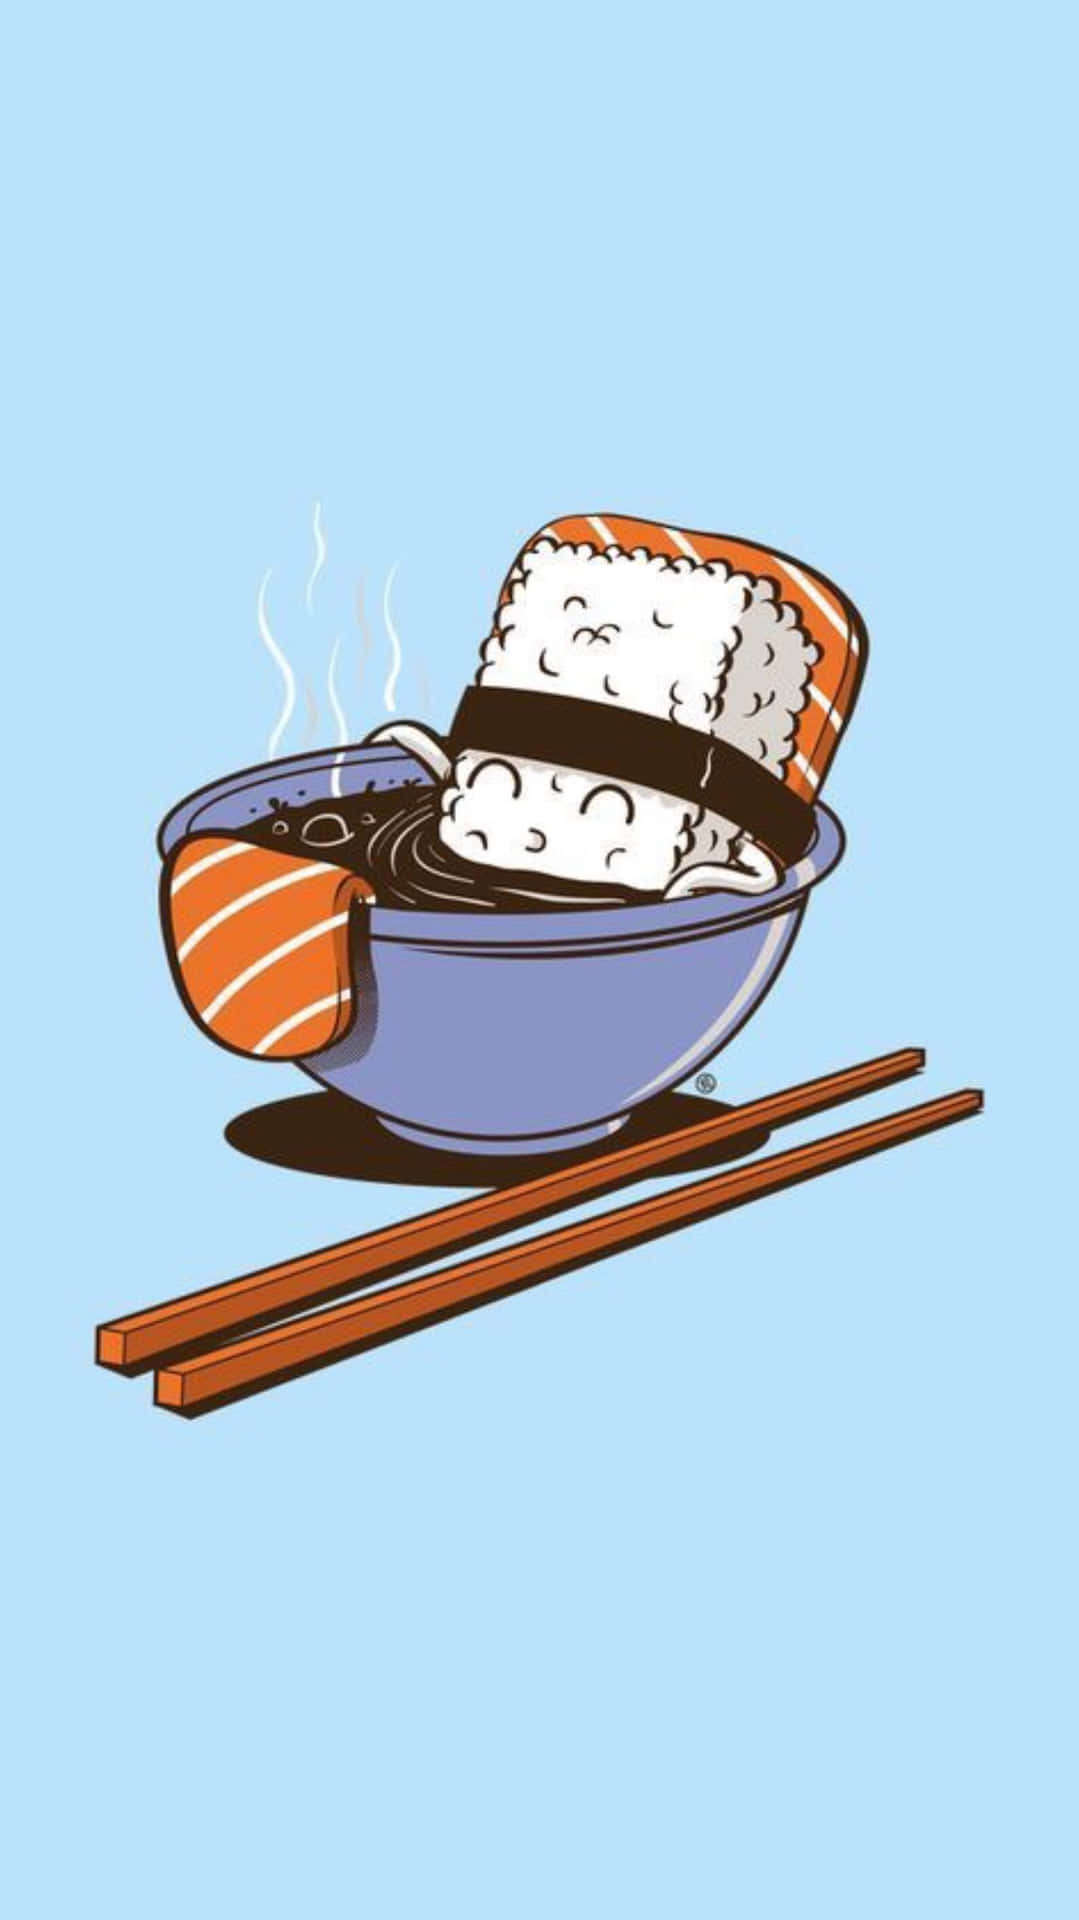 A Bowl Of Sushi With Chopsticks And A Bowl Of Rice Wallpaper